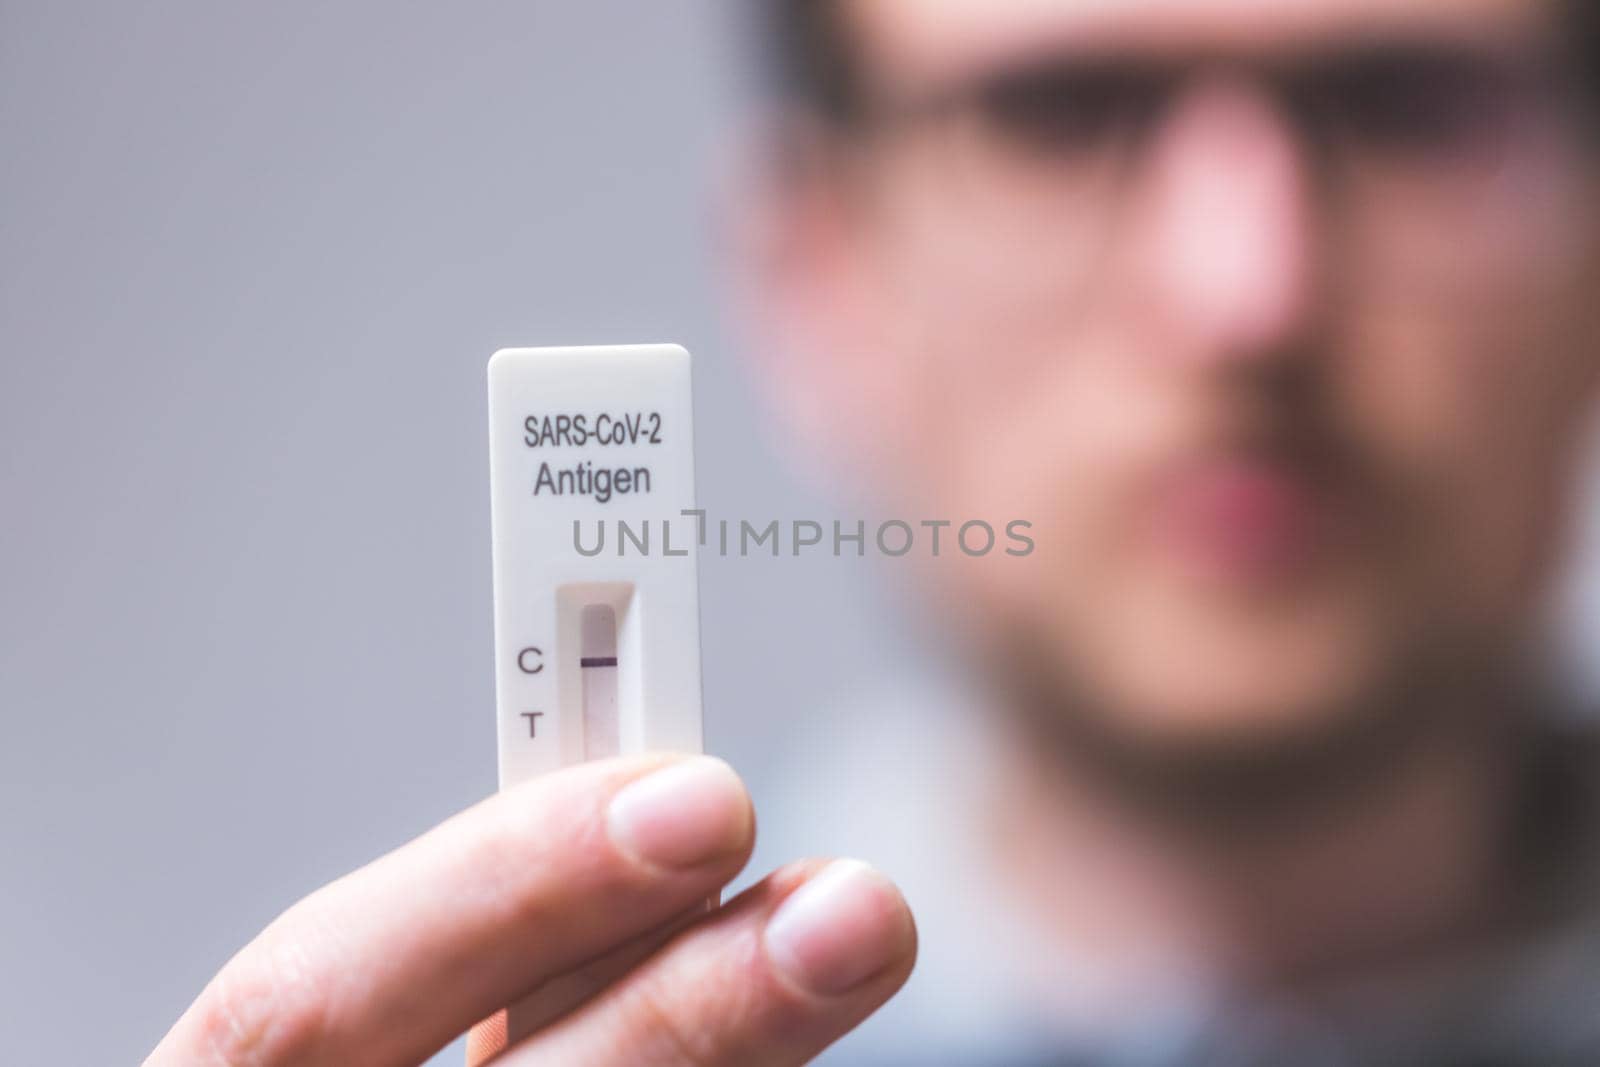 Express corona test at home: Close up of young man holding a negative covid antigen test by Daxenbichler